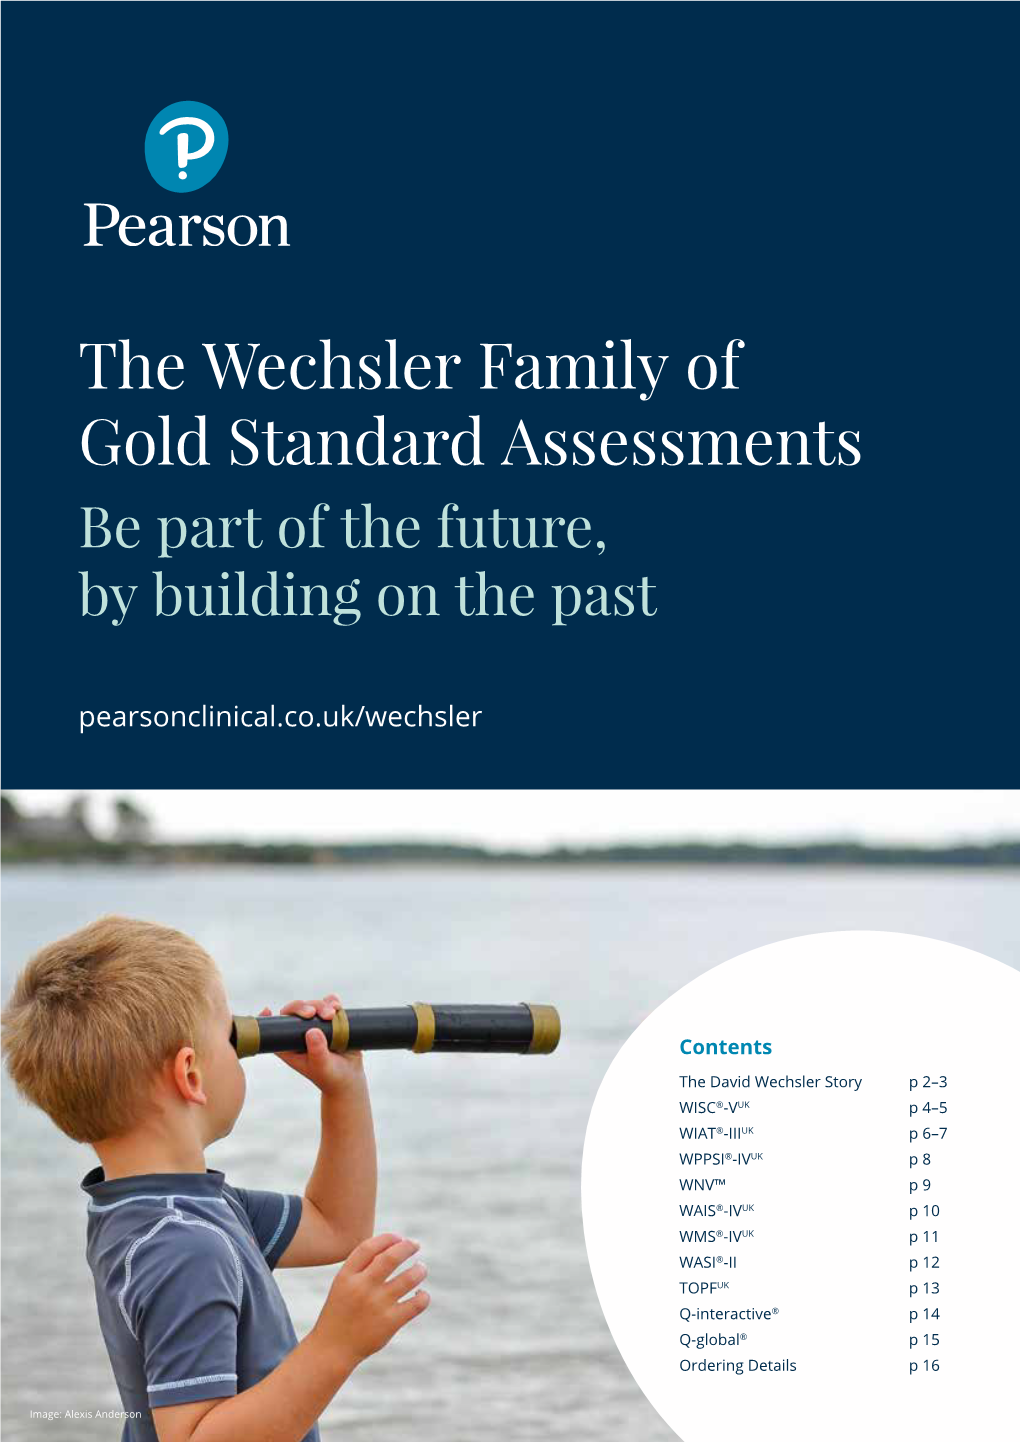 The Wechsler Family of Gold Standard Assessments Be Part of the Future, by Building on the Past